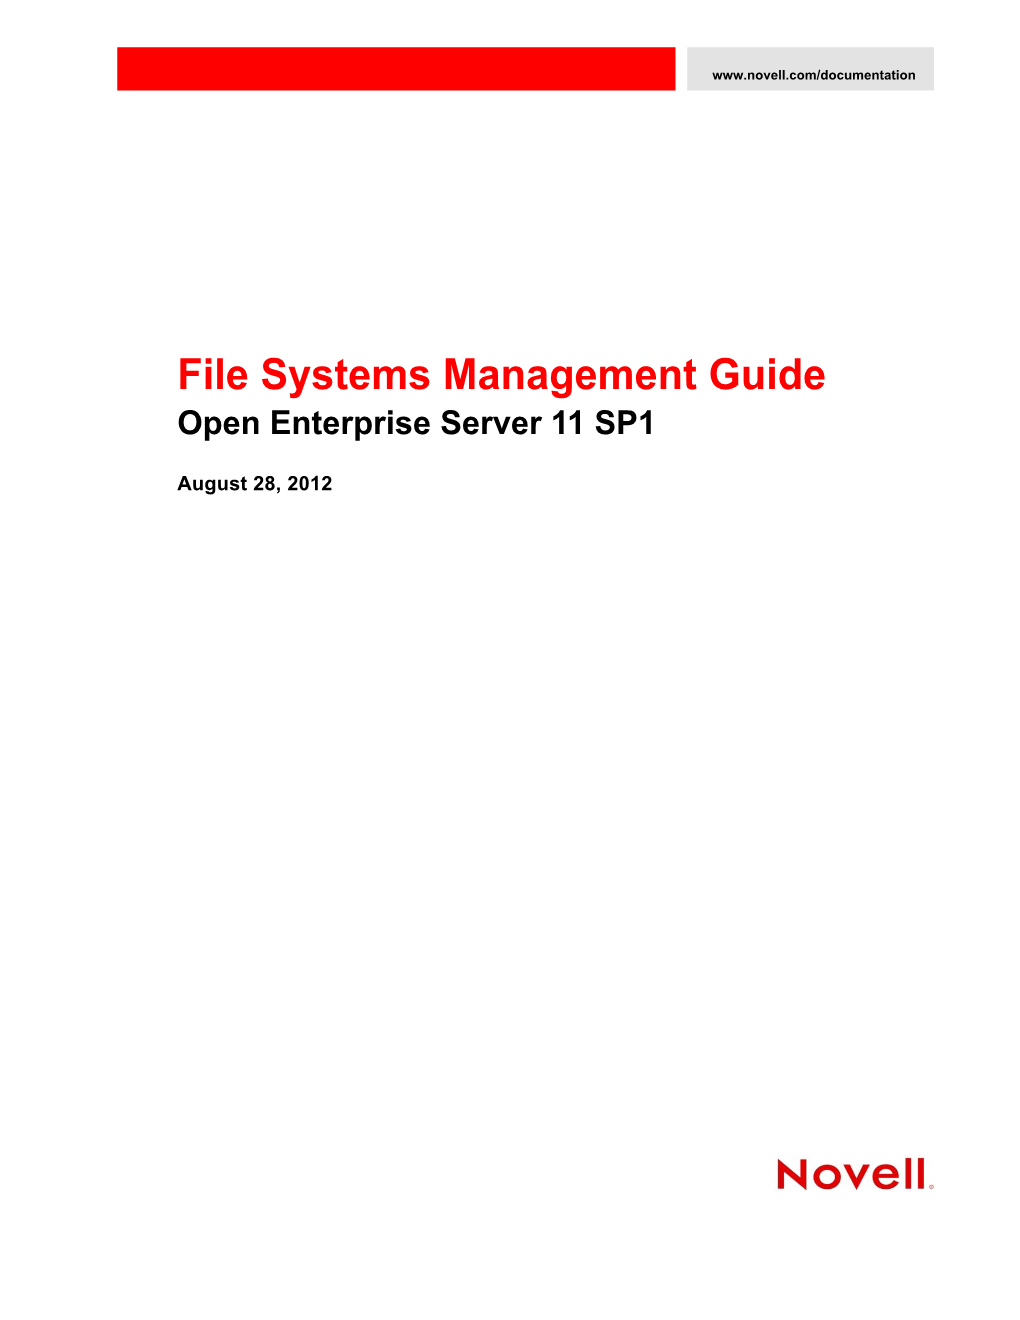 OES 11 SP1: File Systems Management Guide, See the Latest Novell Open Enterprise Server 11 SP1 Documentation Web Site ( Oes11/)